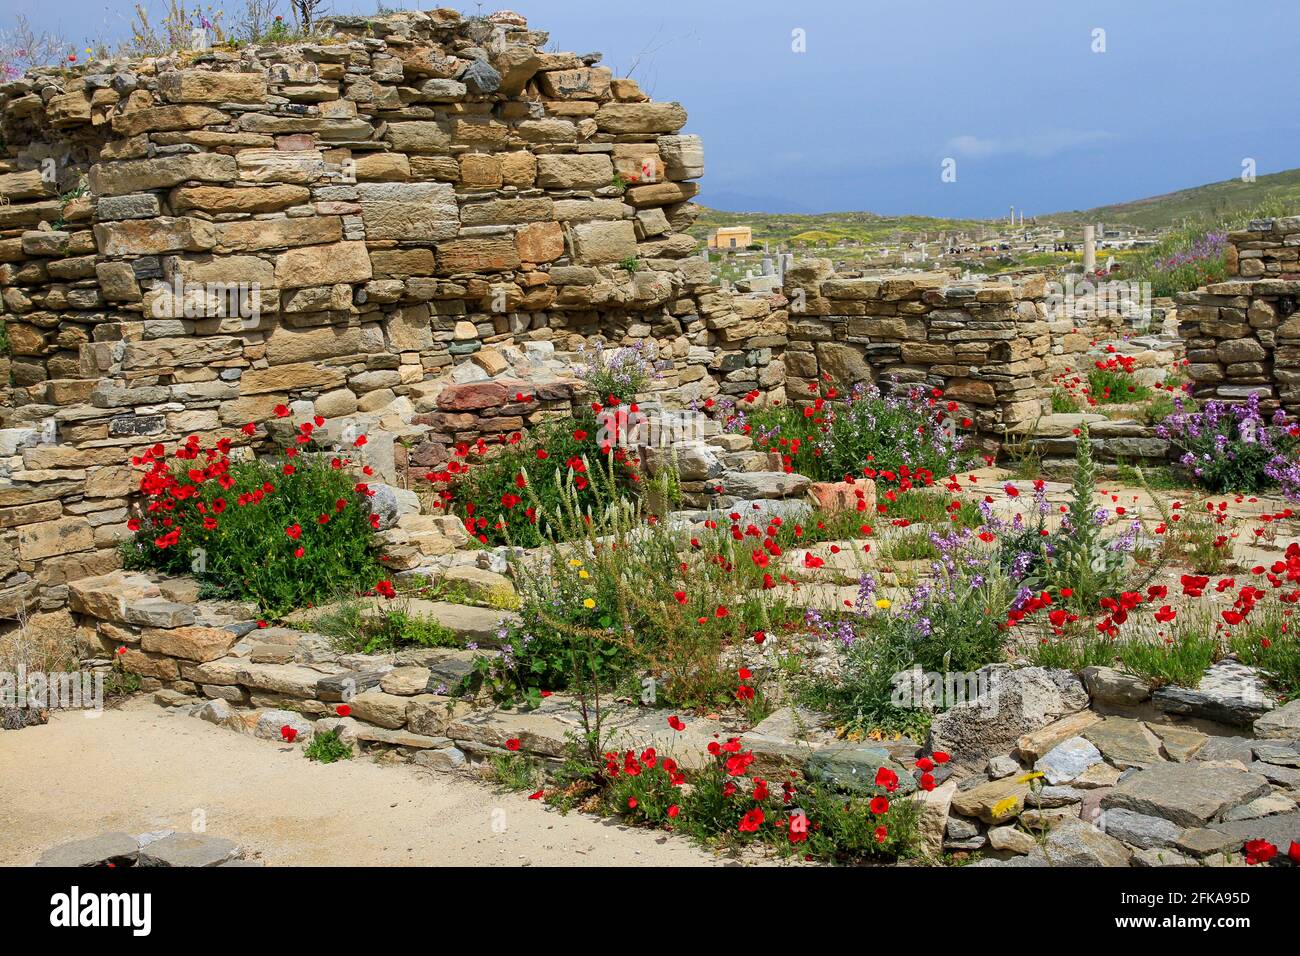 Ancient stone ruins on island of Delos with wildflowers, Cyclades Archipelago, Greece Stock Photo